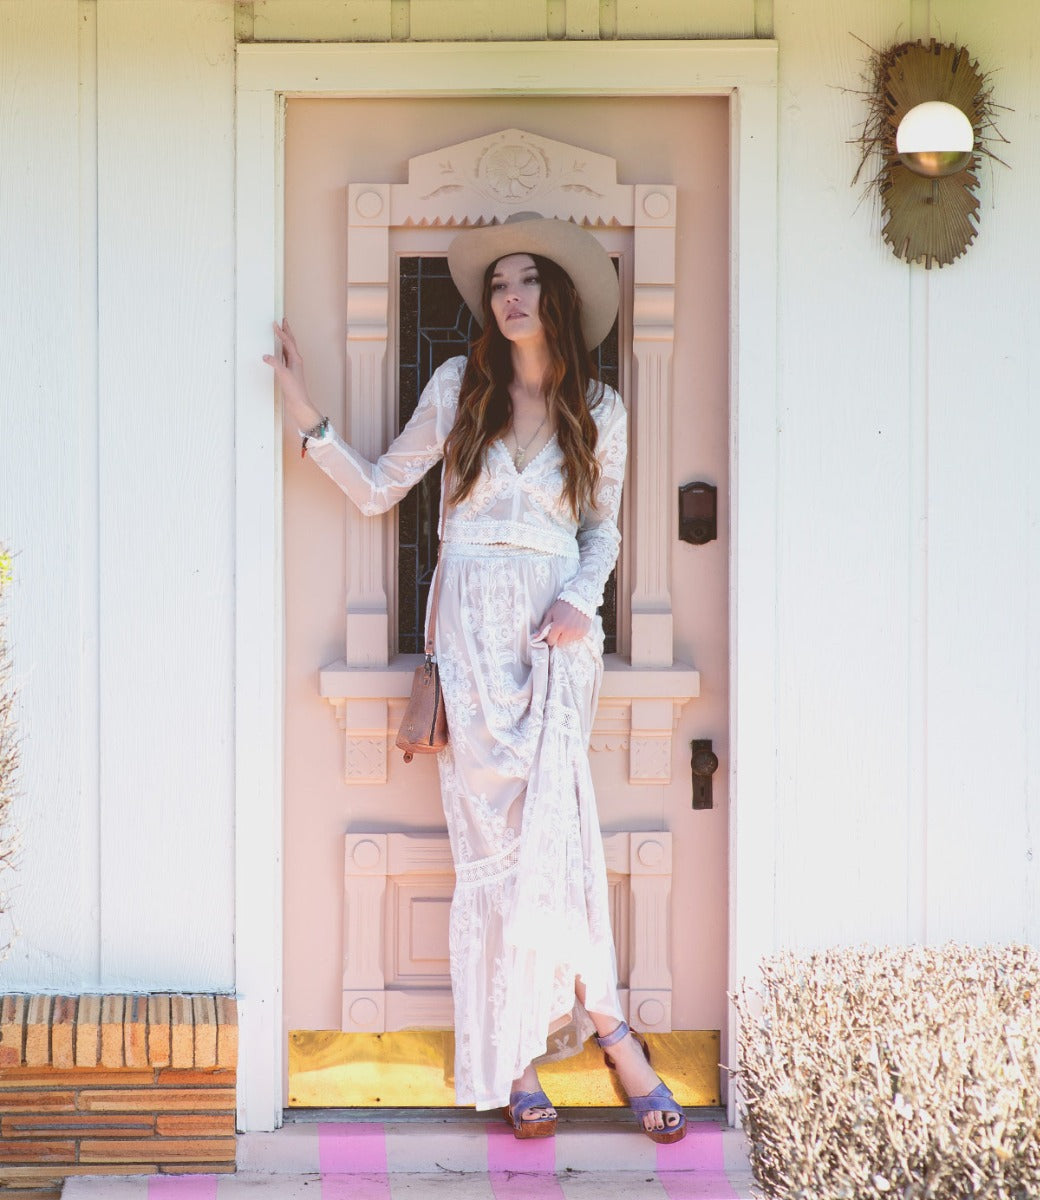 A woman wearing a white dress, cowboy hat and Grettell sandals while standing in front of a pink door.